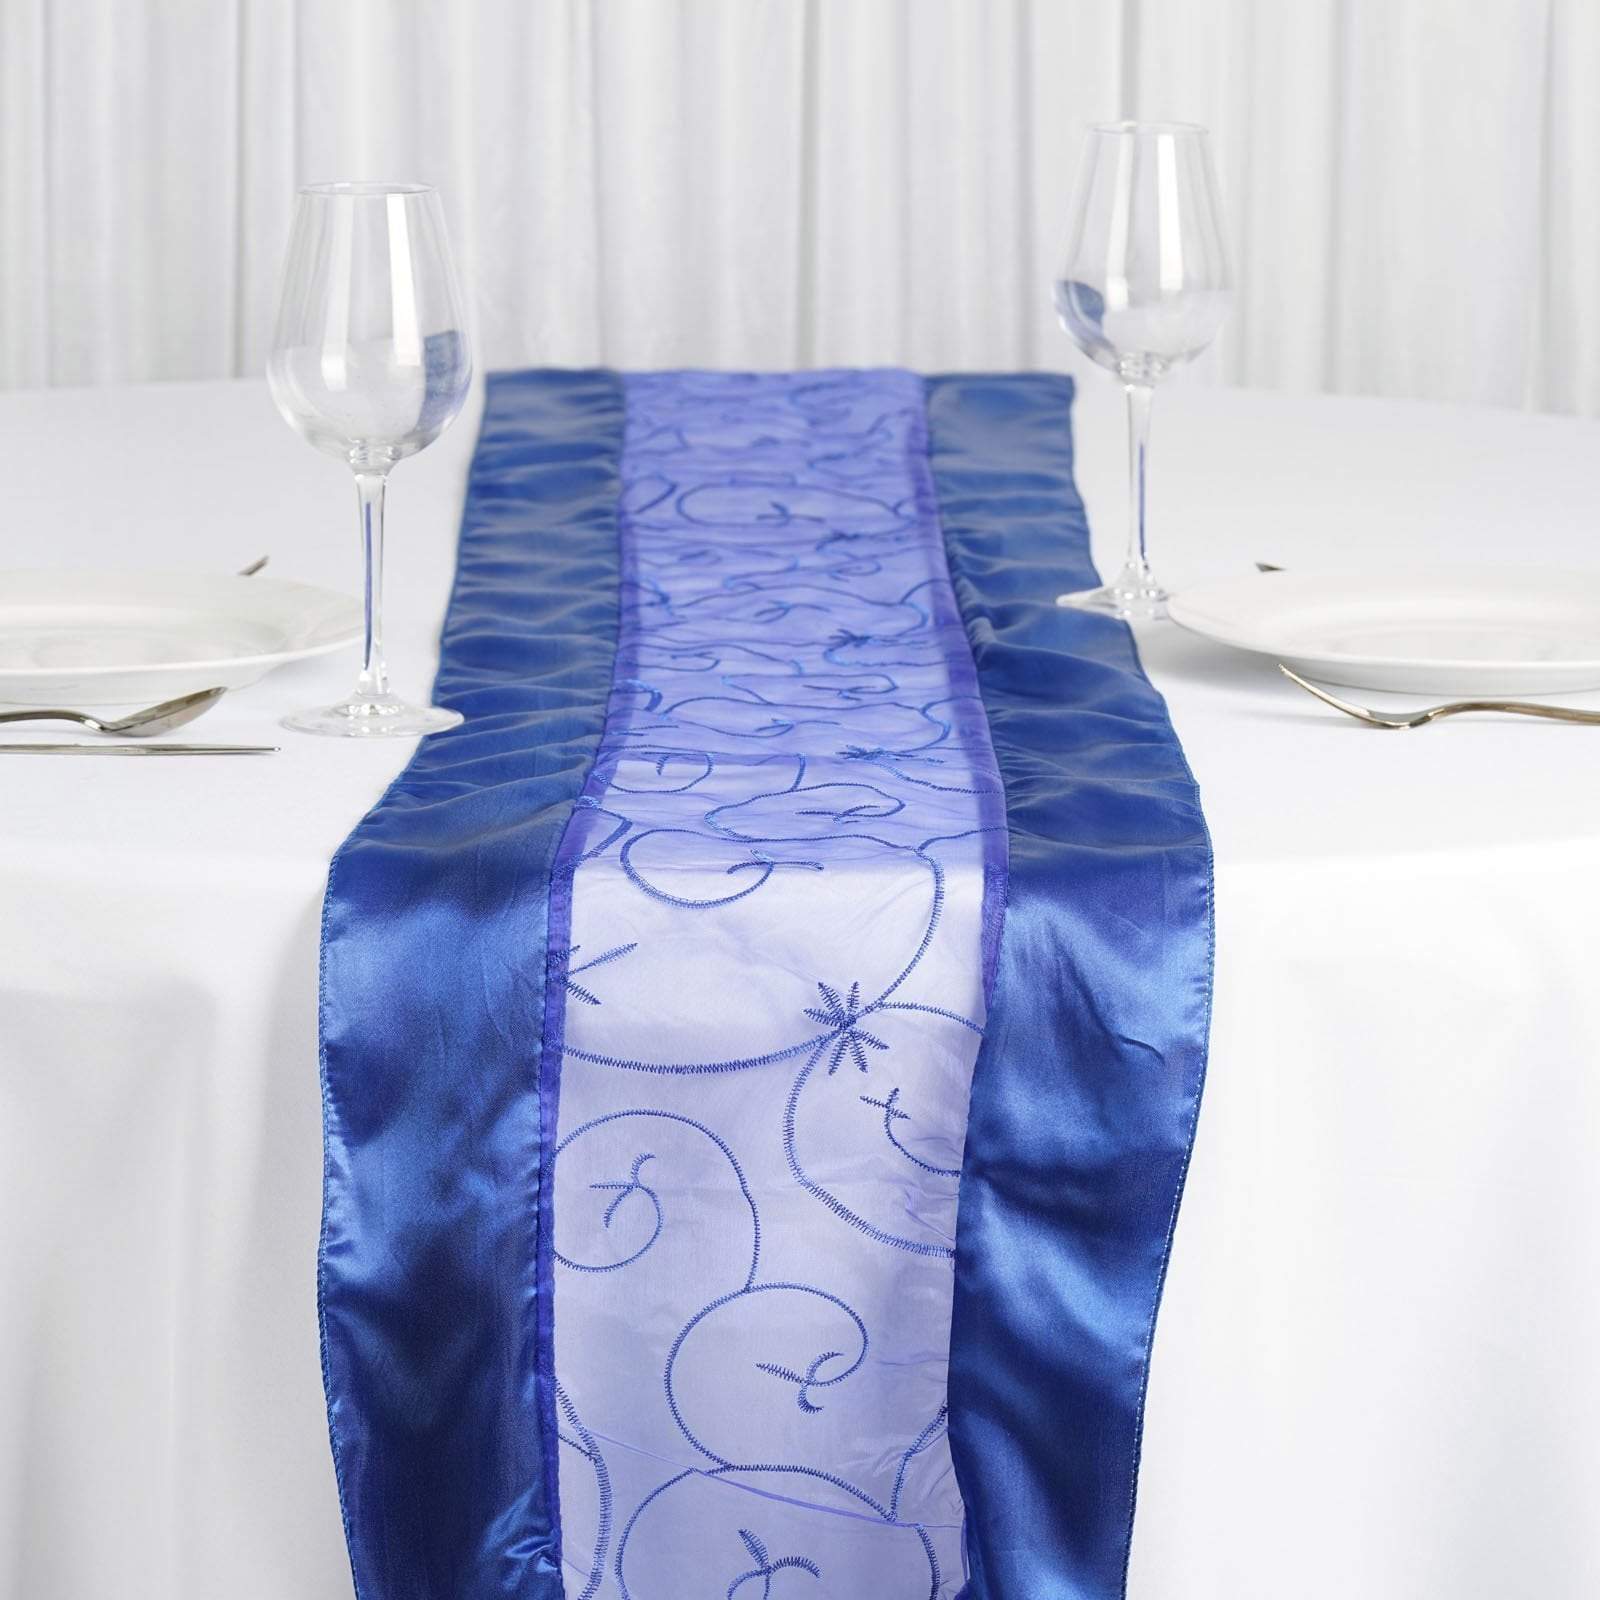 Embroidered Organza Table Runner